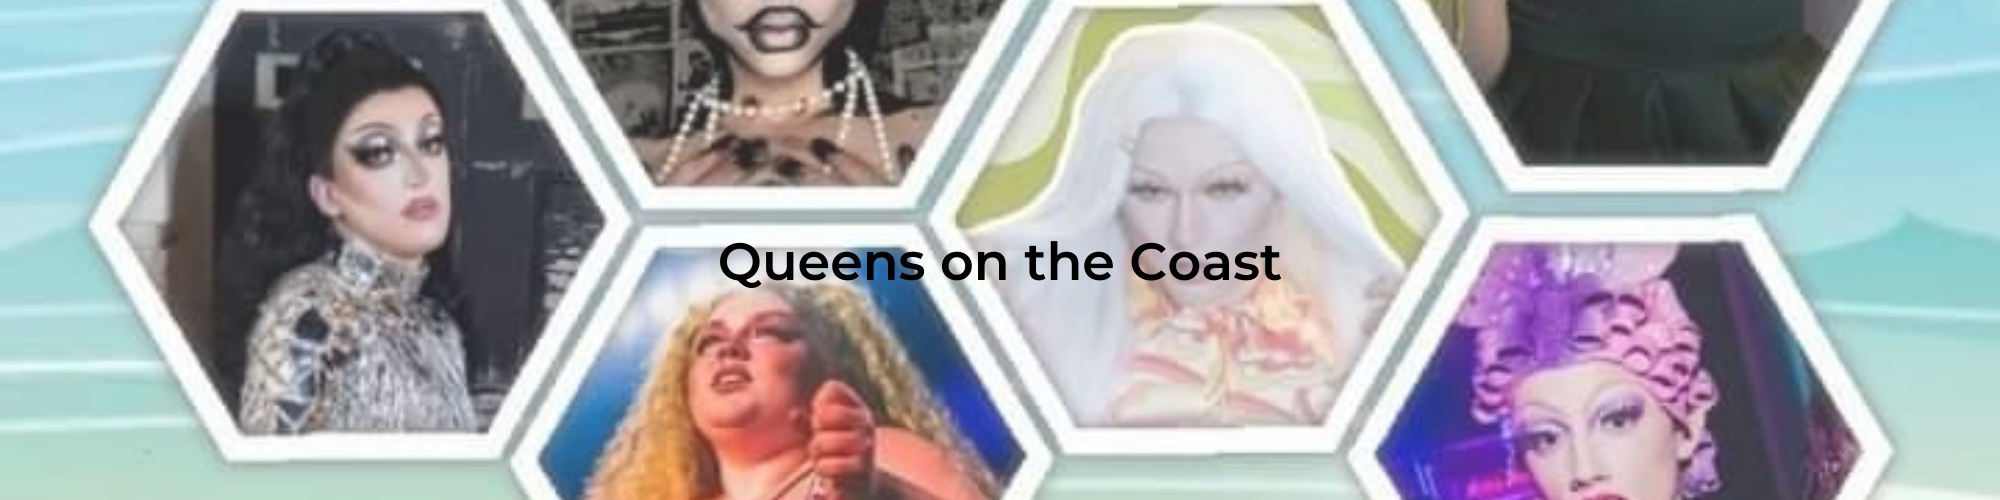 Queens on the Coast